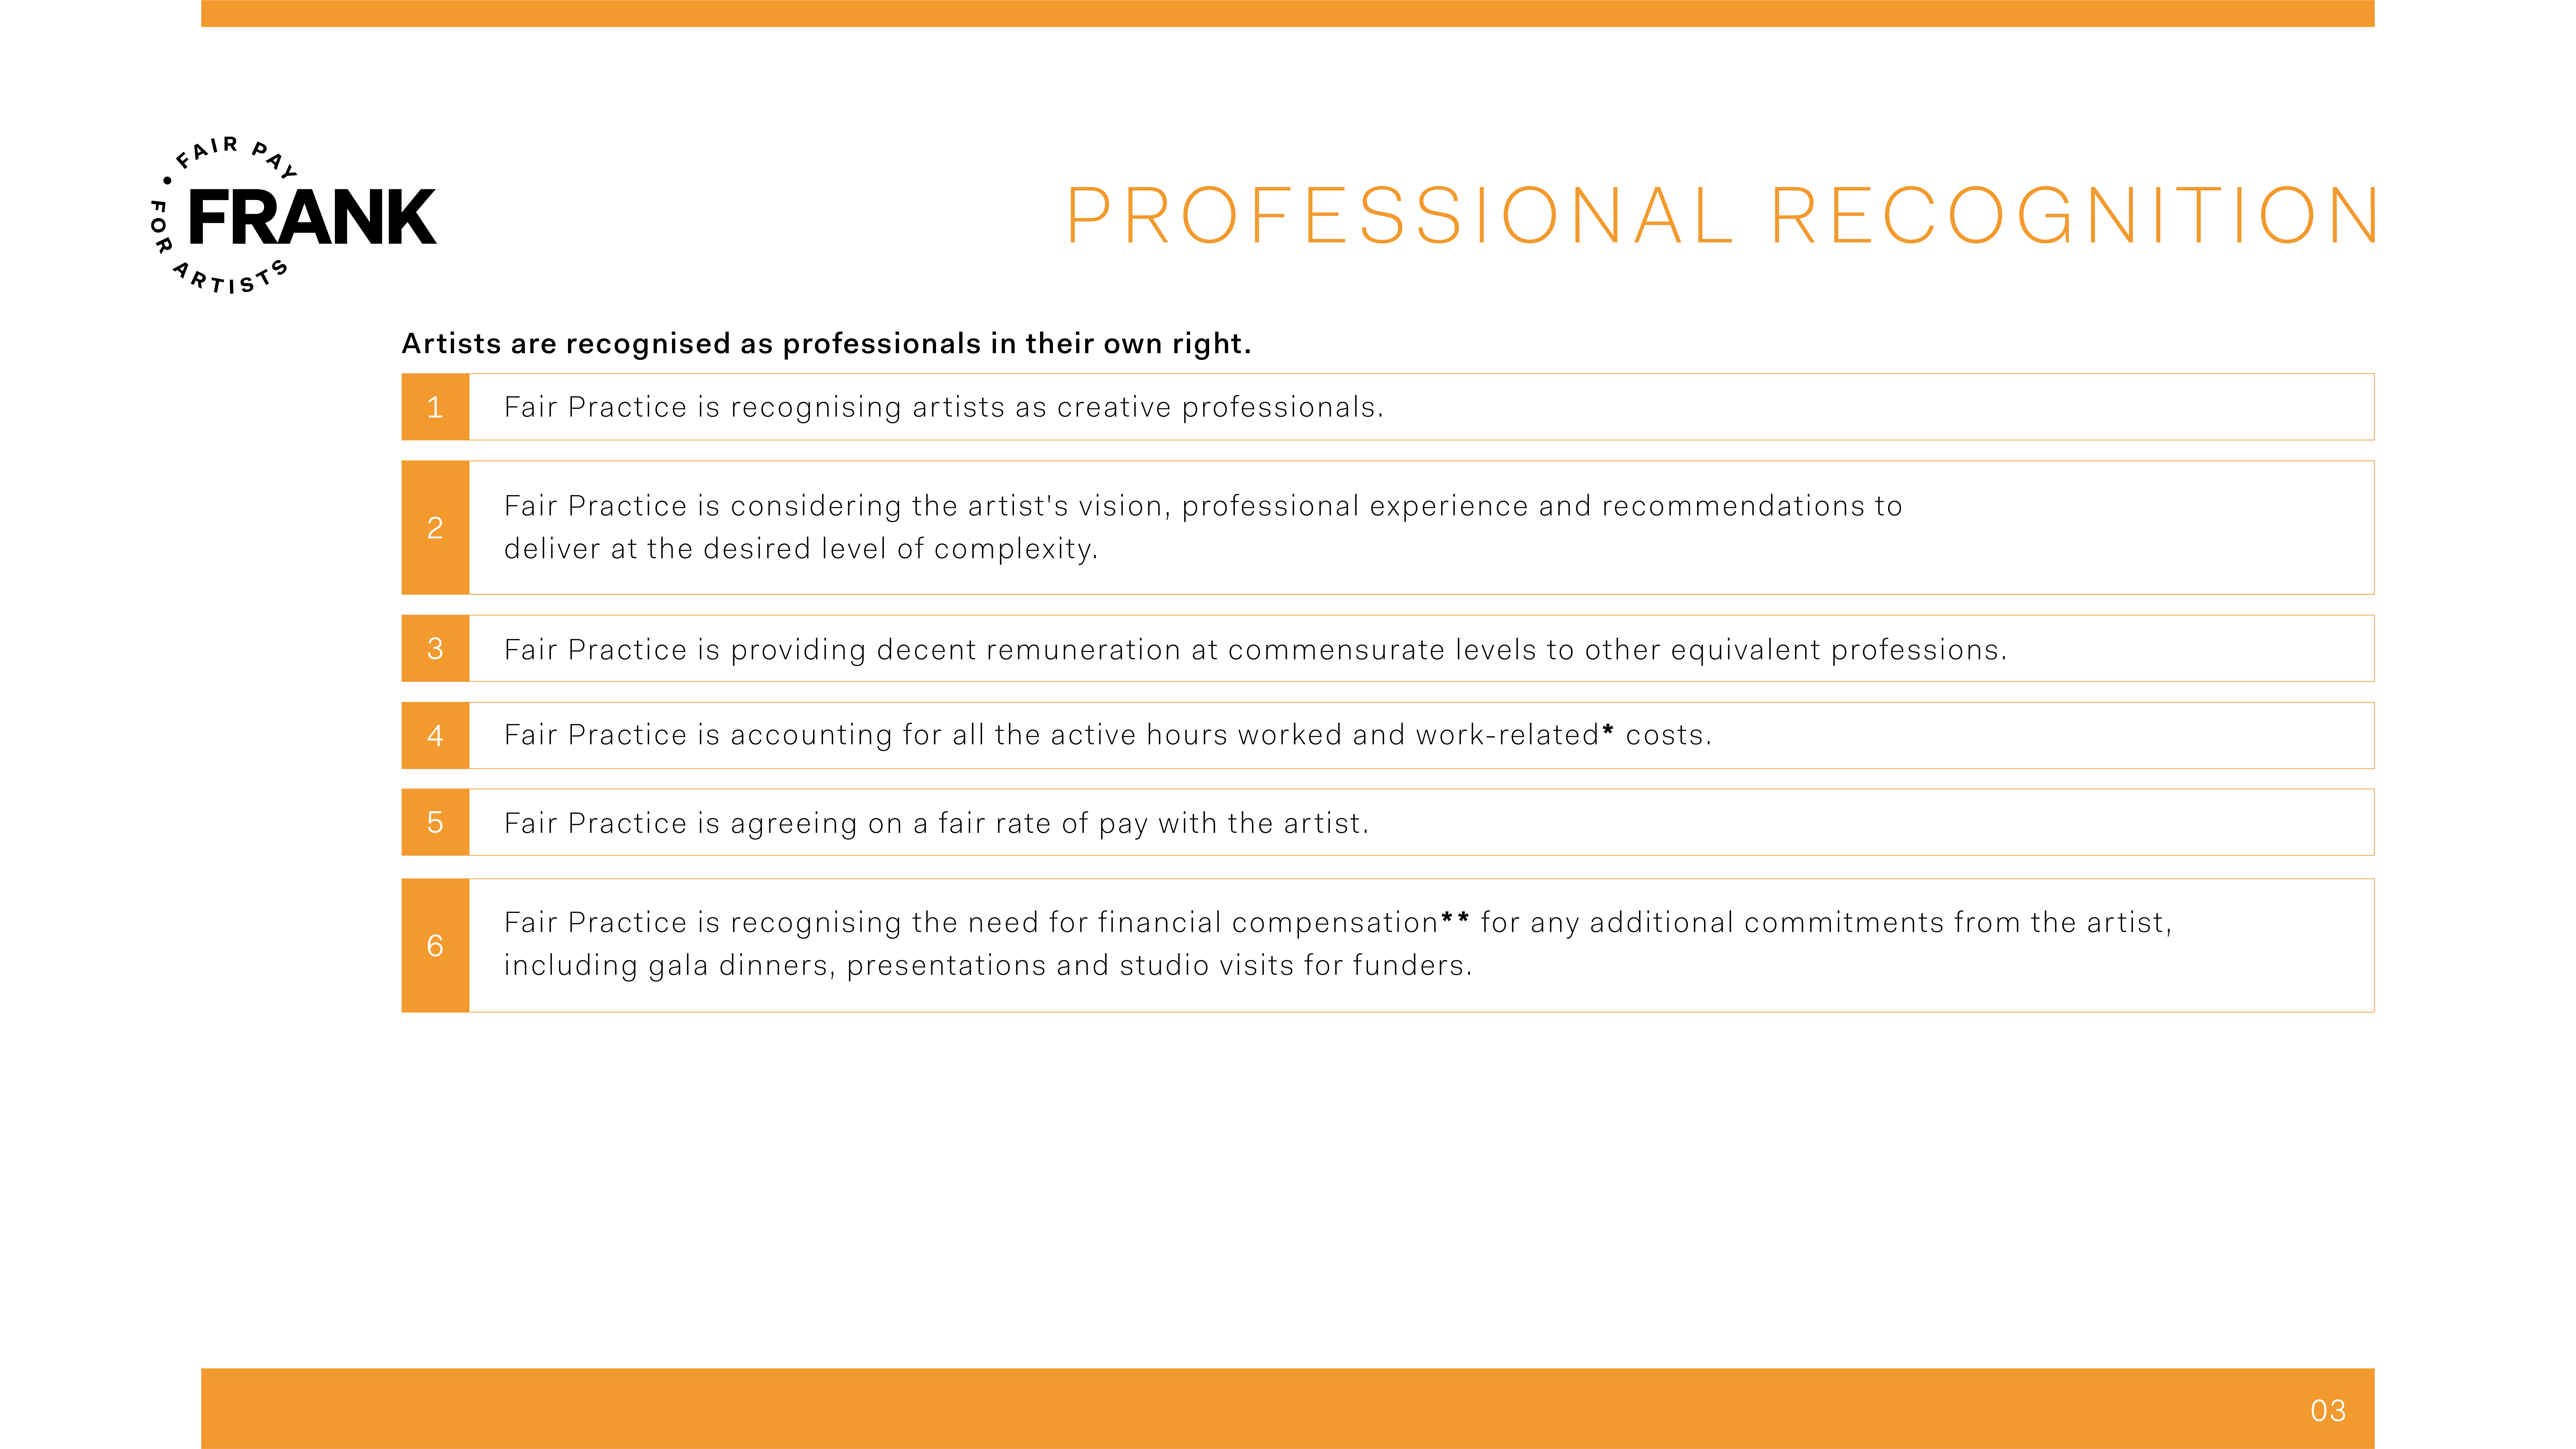 Professional Recognition: Artists are recognised as professionals in their own right. 1) Fair Practice is recognising artists as creative professionals. 2) Fair Practice is considering the artist's vision, professional experience and recommendations to deliver at the desired level of complexity. 3) Fair Practice is providing decent remuneration at commensurate levels to other equivalent professions. 4) Fair Practice is accounting for all the active hours worked and work-related* costs. 5) Fair Practice is agreeing on a fair rate of pay with the artist. 6) Fair Practice is recognising the need for financial compensation** for any additional commitments from the artist, including gala dinners, presentations and studio visits for funders.